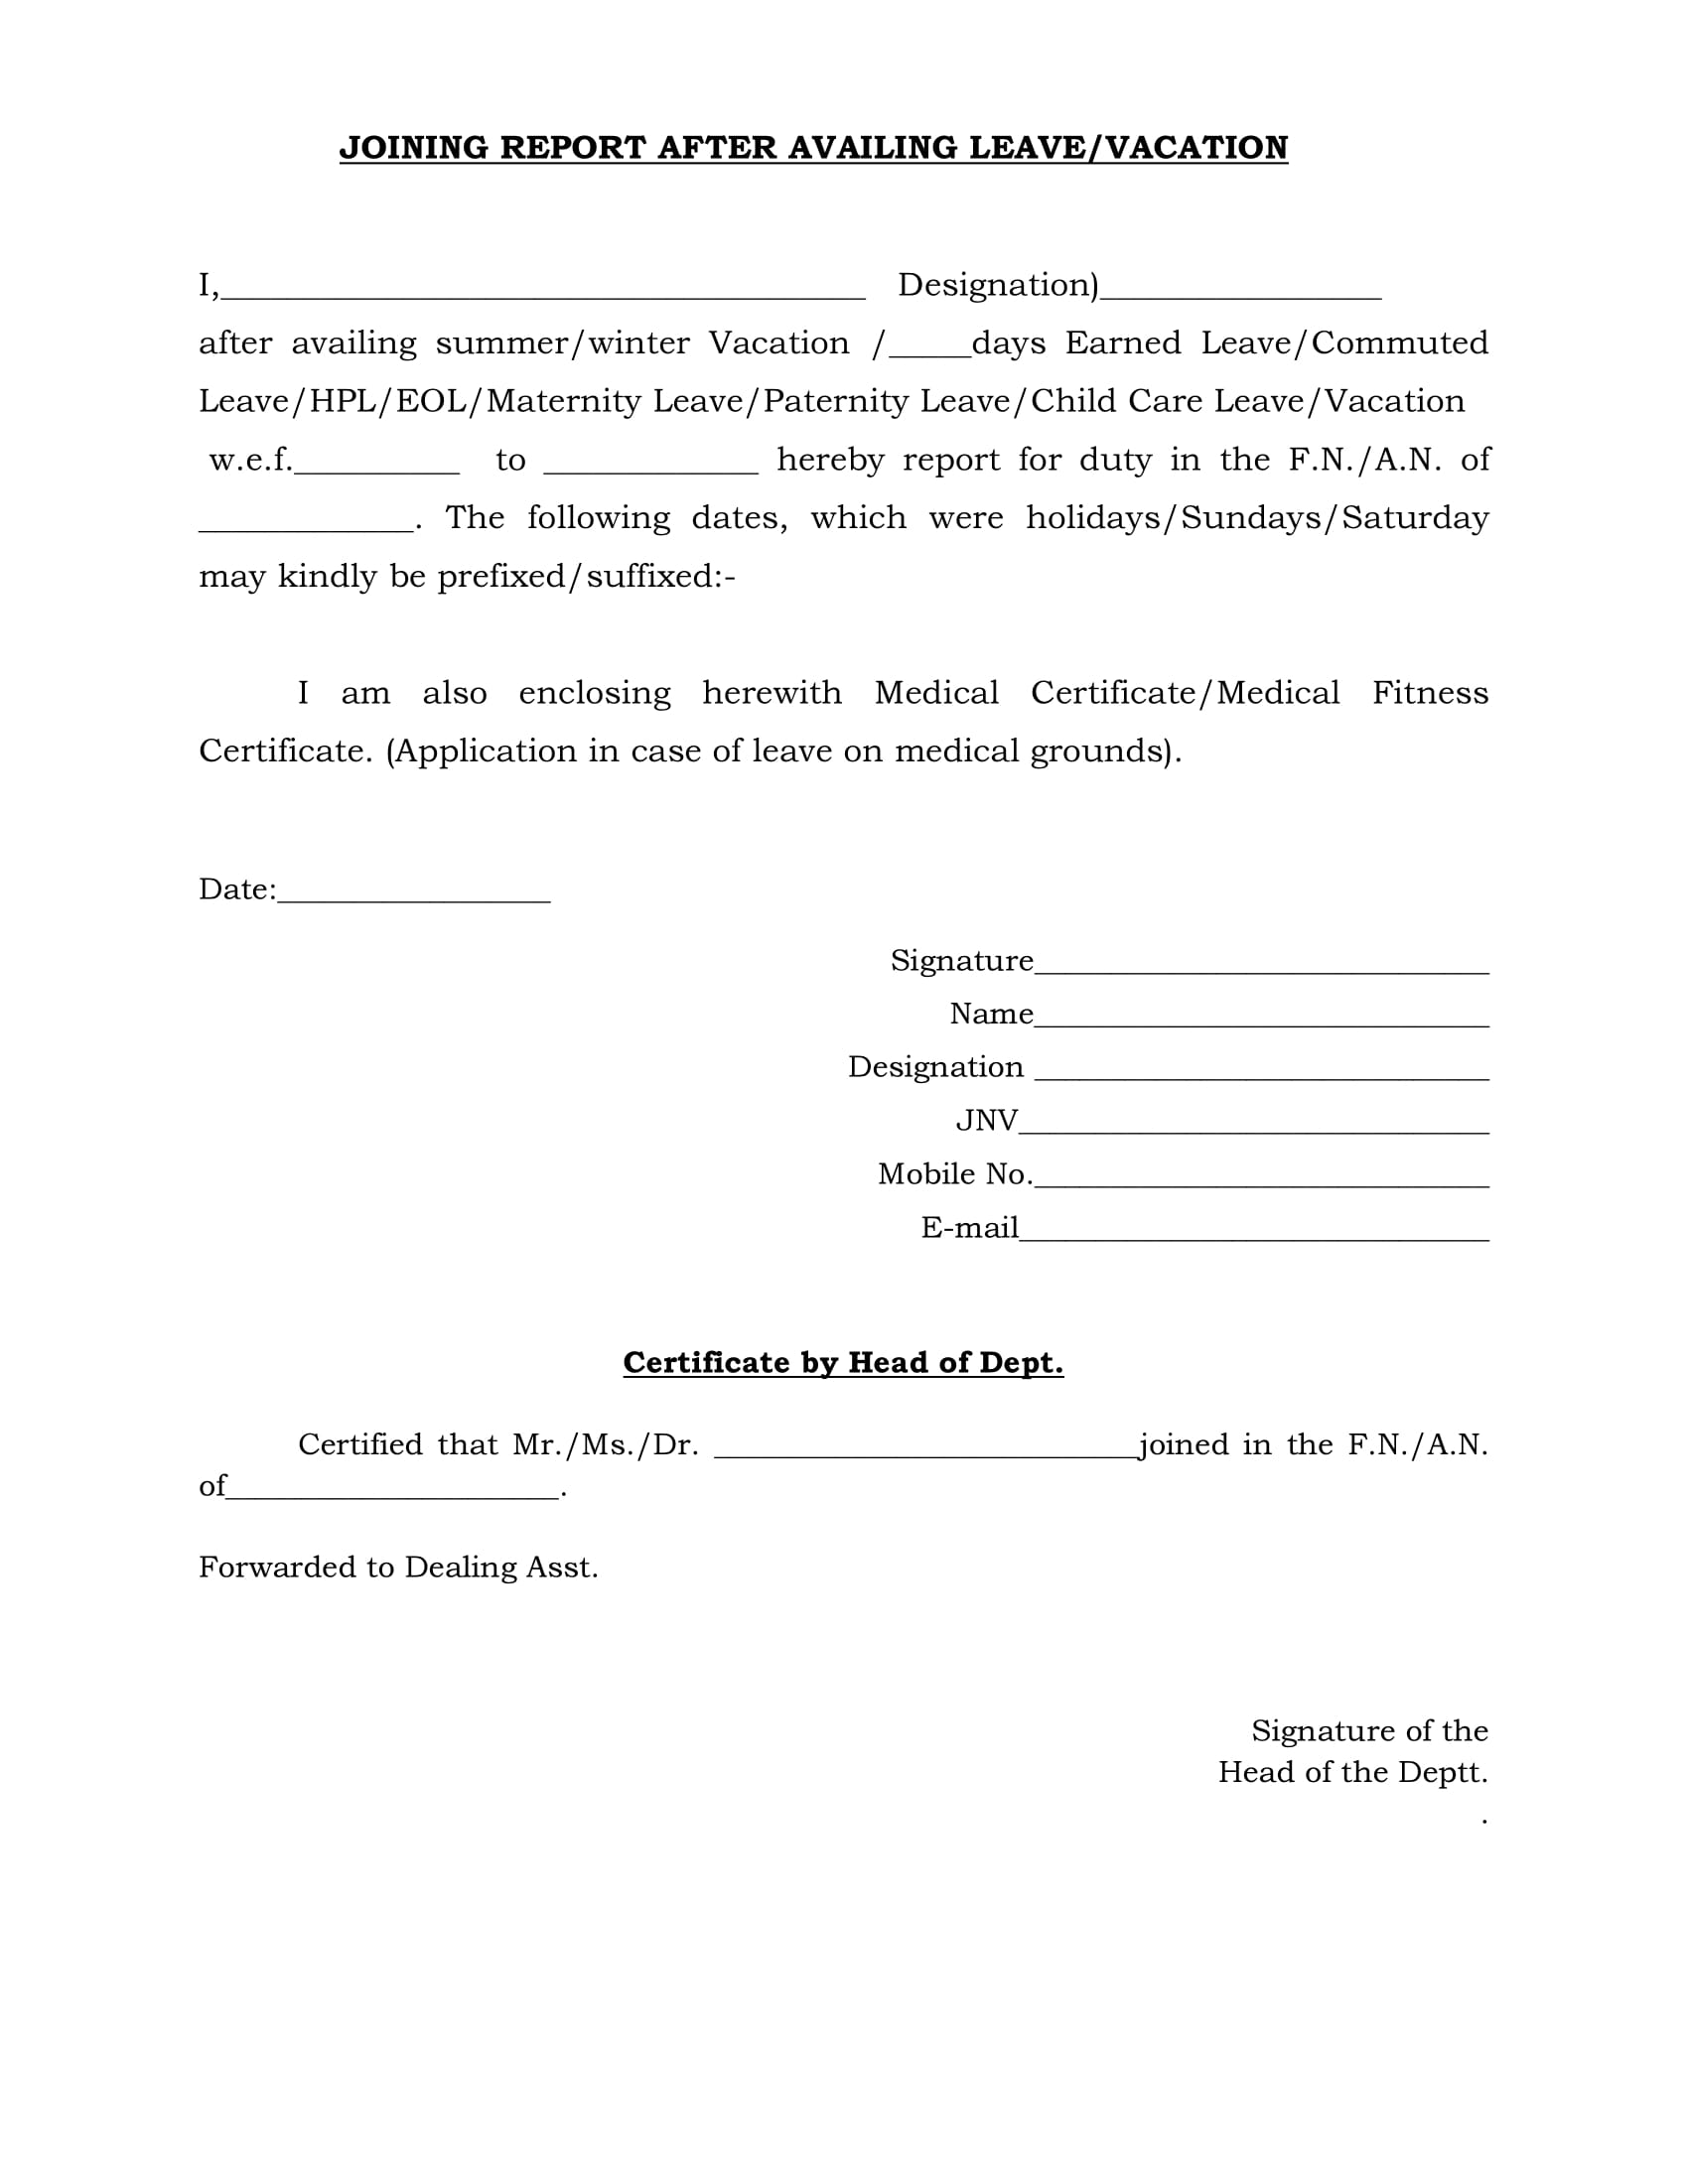 joining report form after leave 1